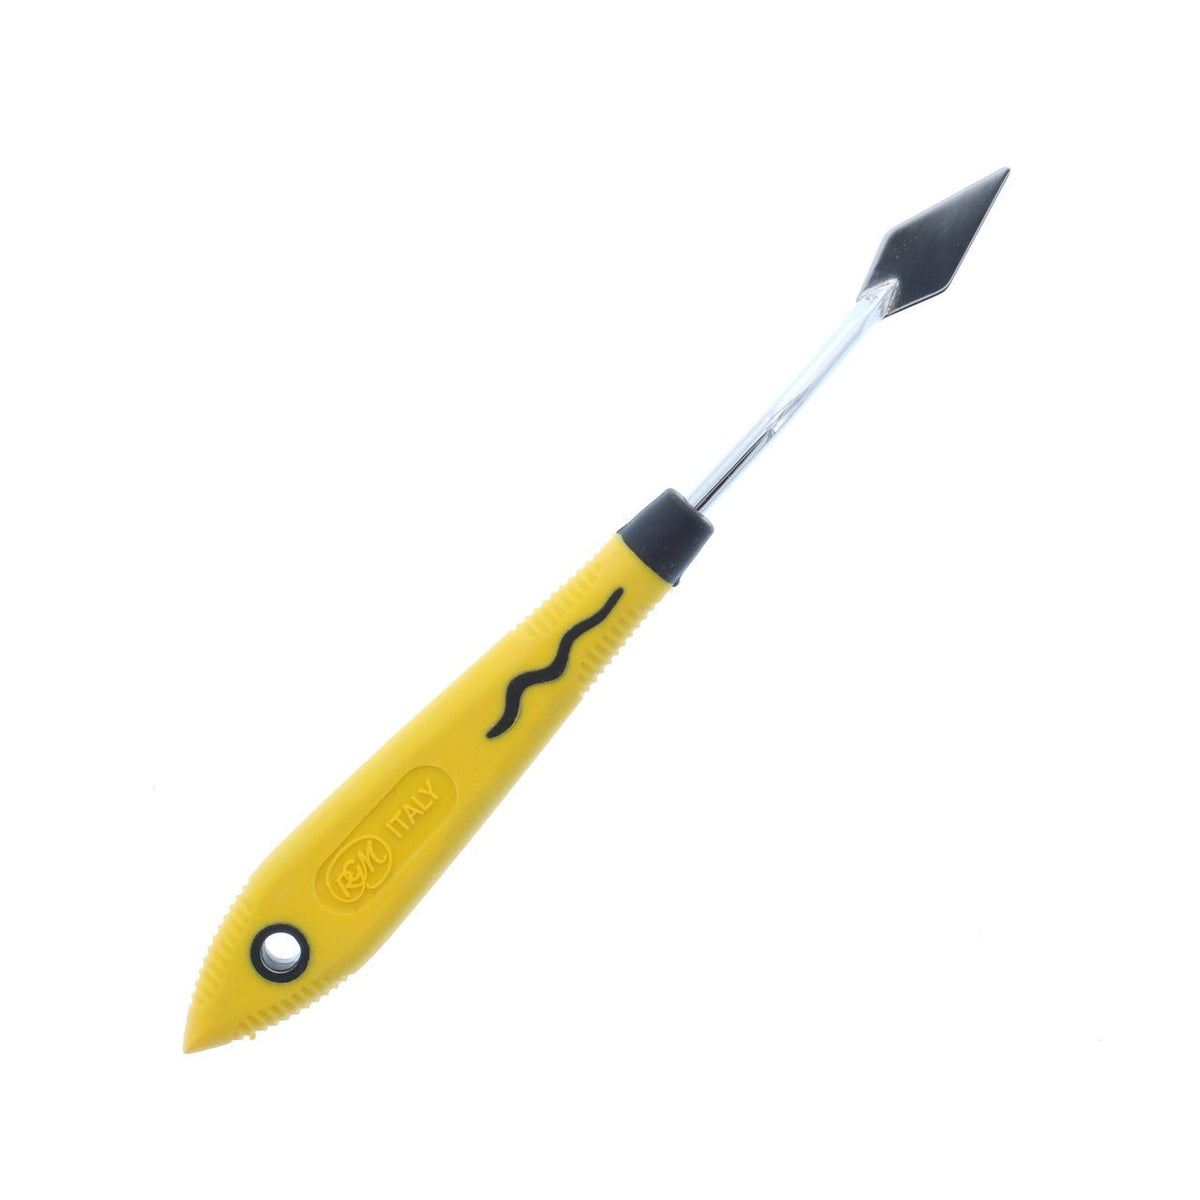 RGM Soft Grip Painting Knife #040 (Yellow Handle) - merriartist.com